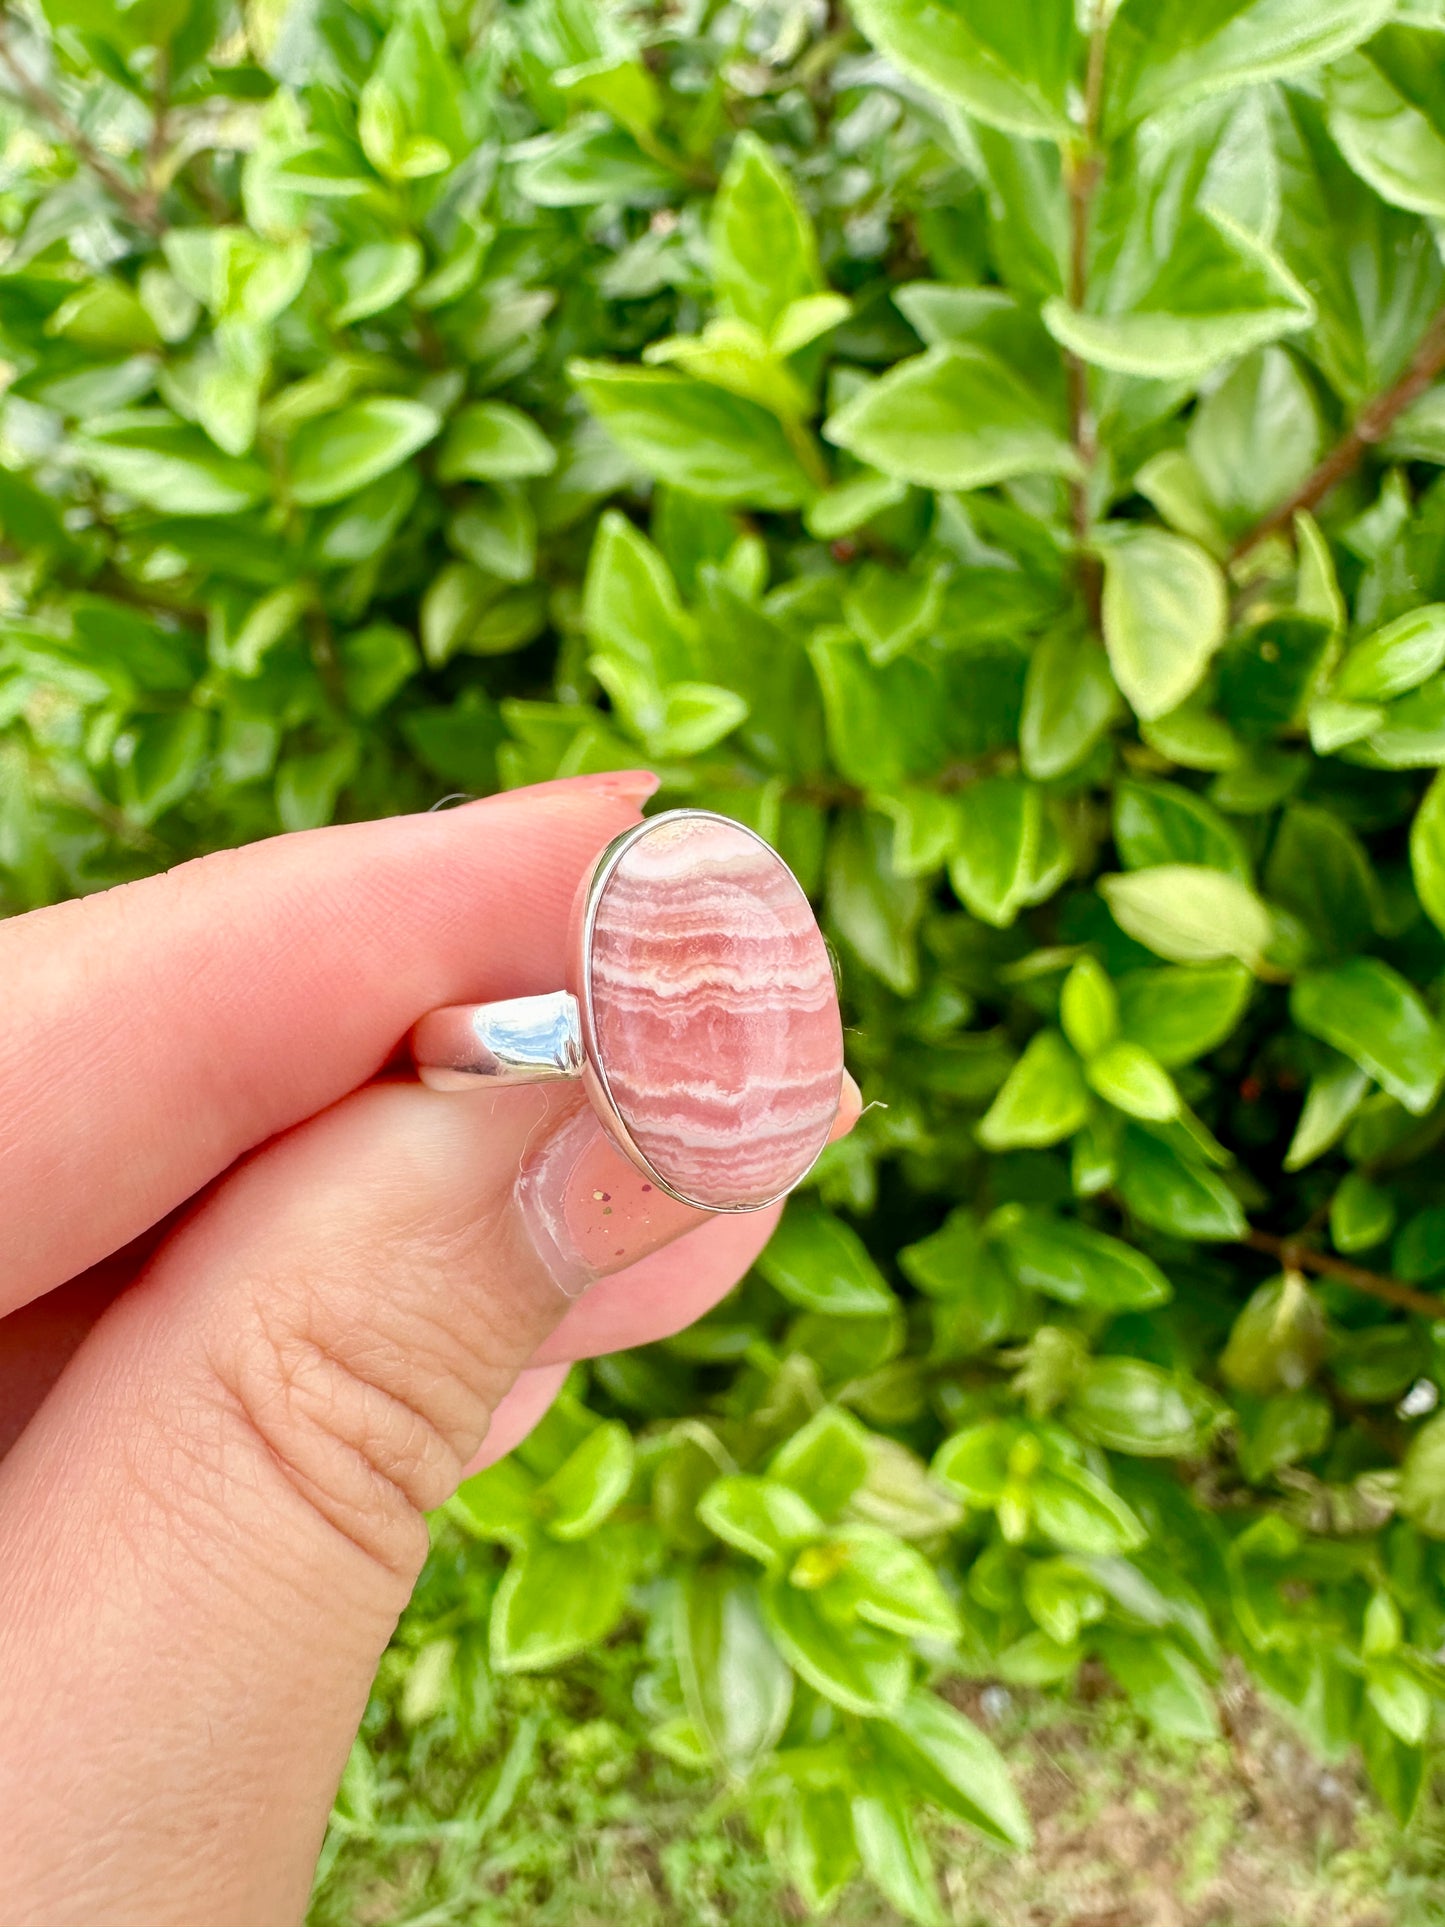 Beautiful Rhodochrosite Sterling Silver Ring Size 8.25 - Elegant Pink Gemstone, Artisan Crafted Jewelry, Perfect for Any Occasion